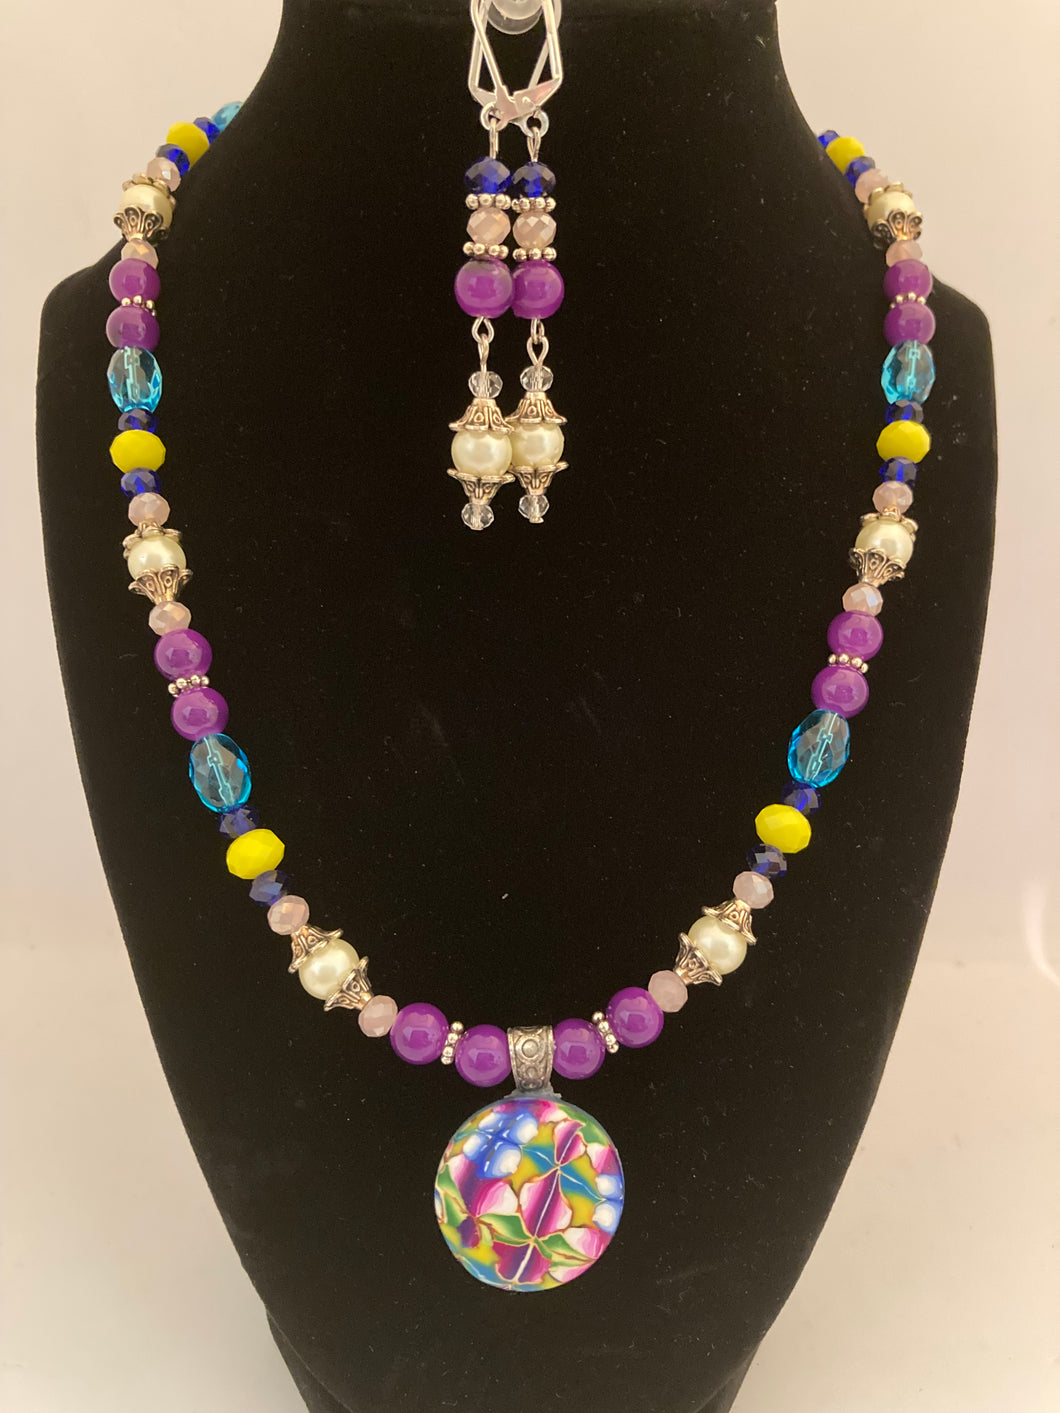 Multic-color cabachon pendant necklace with long dangling earrings